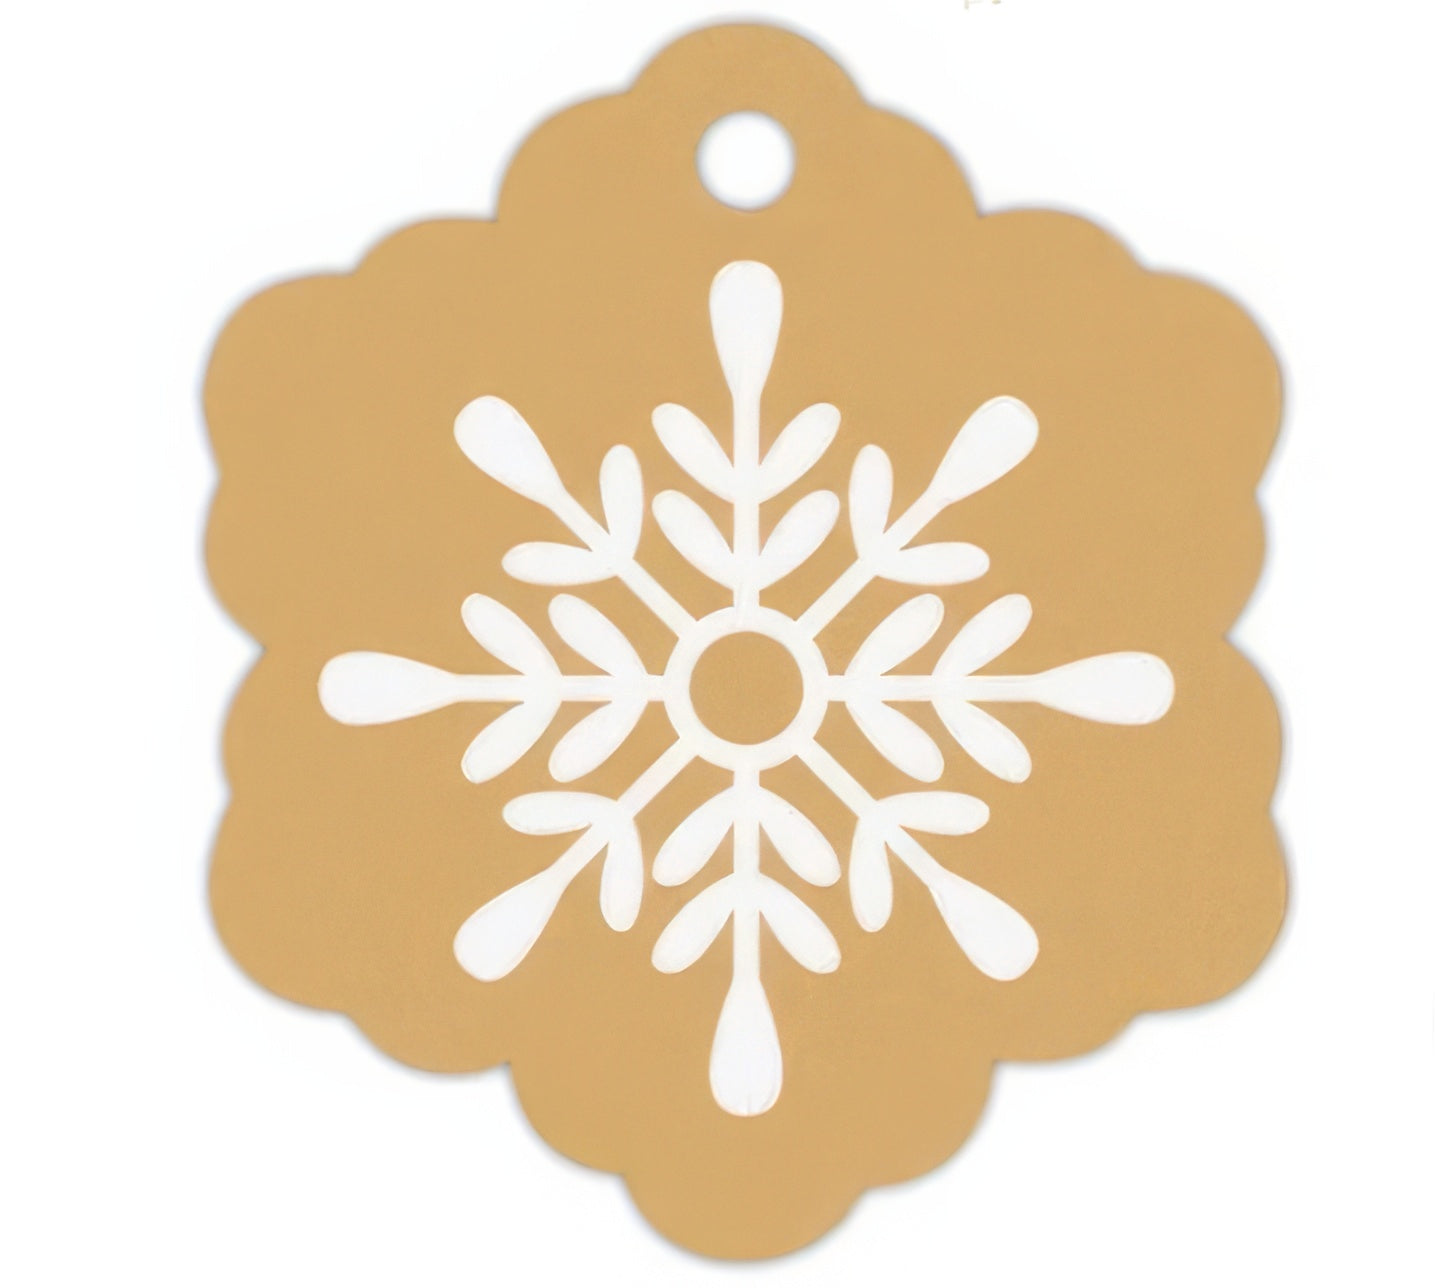 The Merry Christmas Snowman Snowflake Gift Tags Pkg of 15